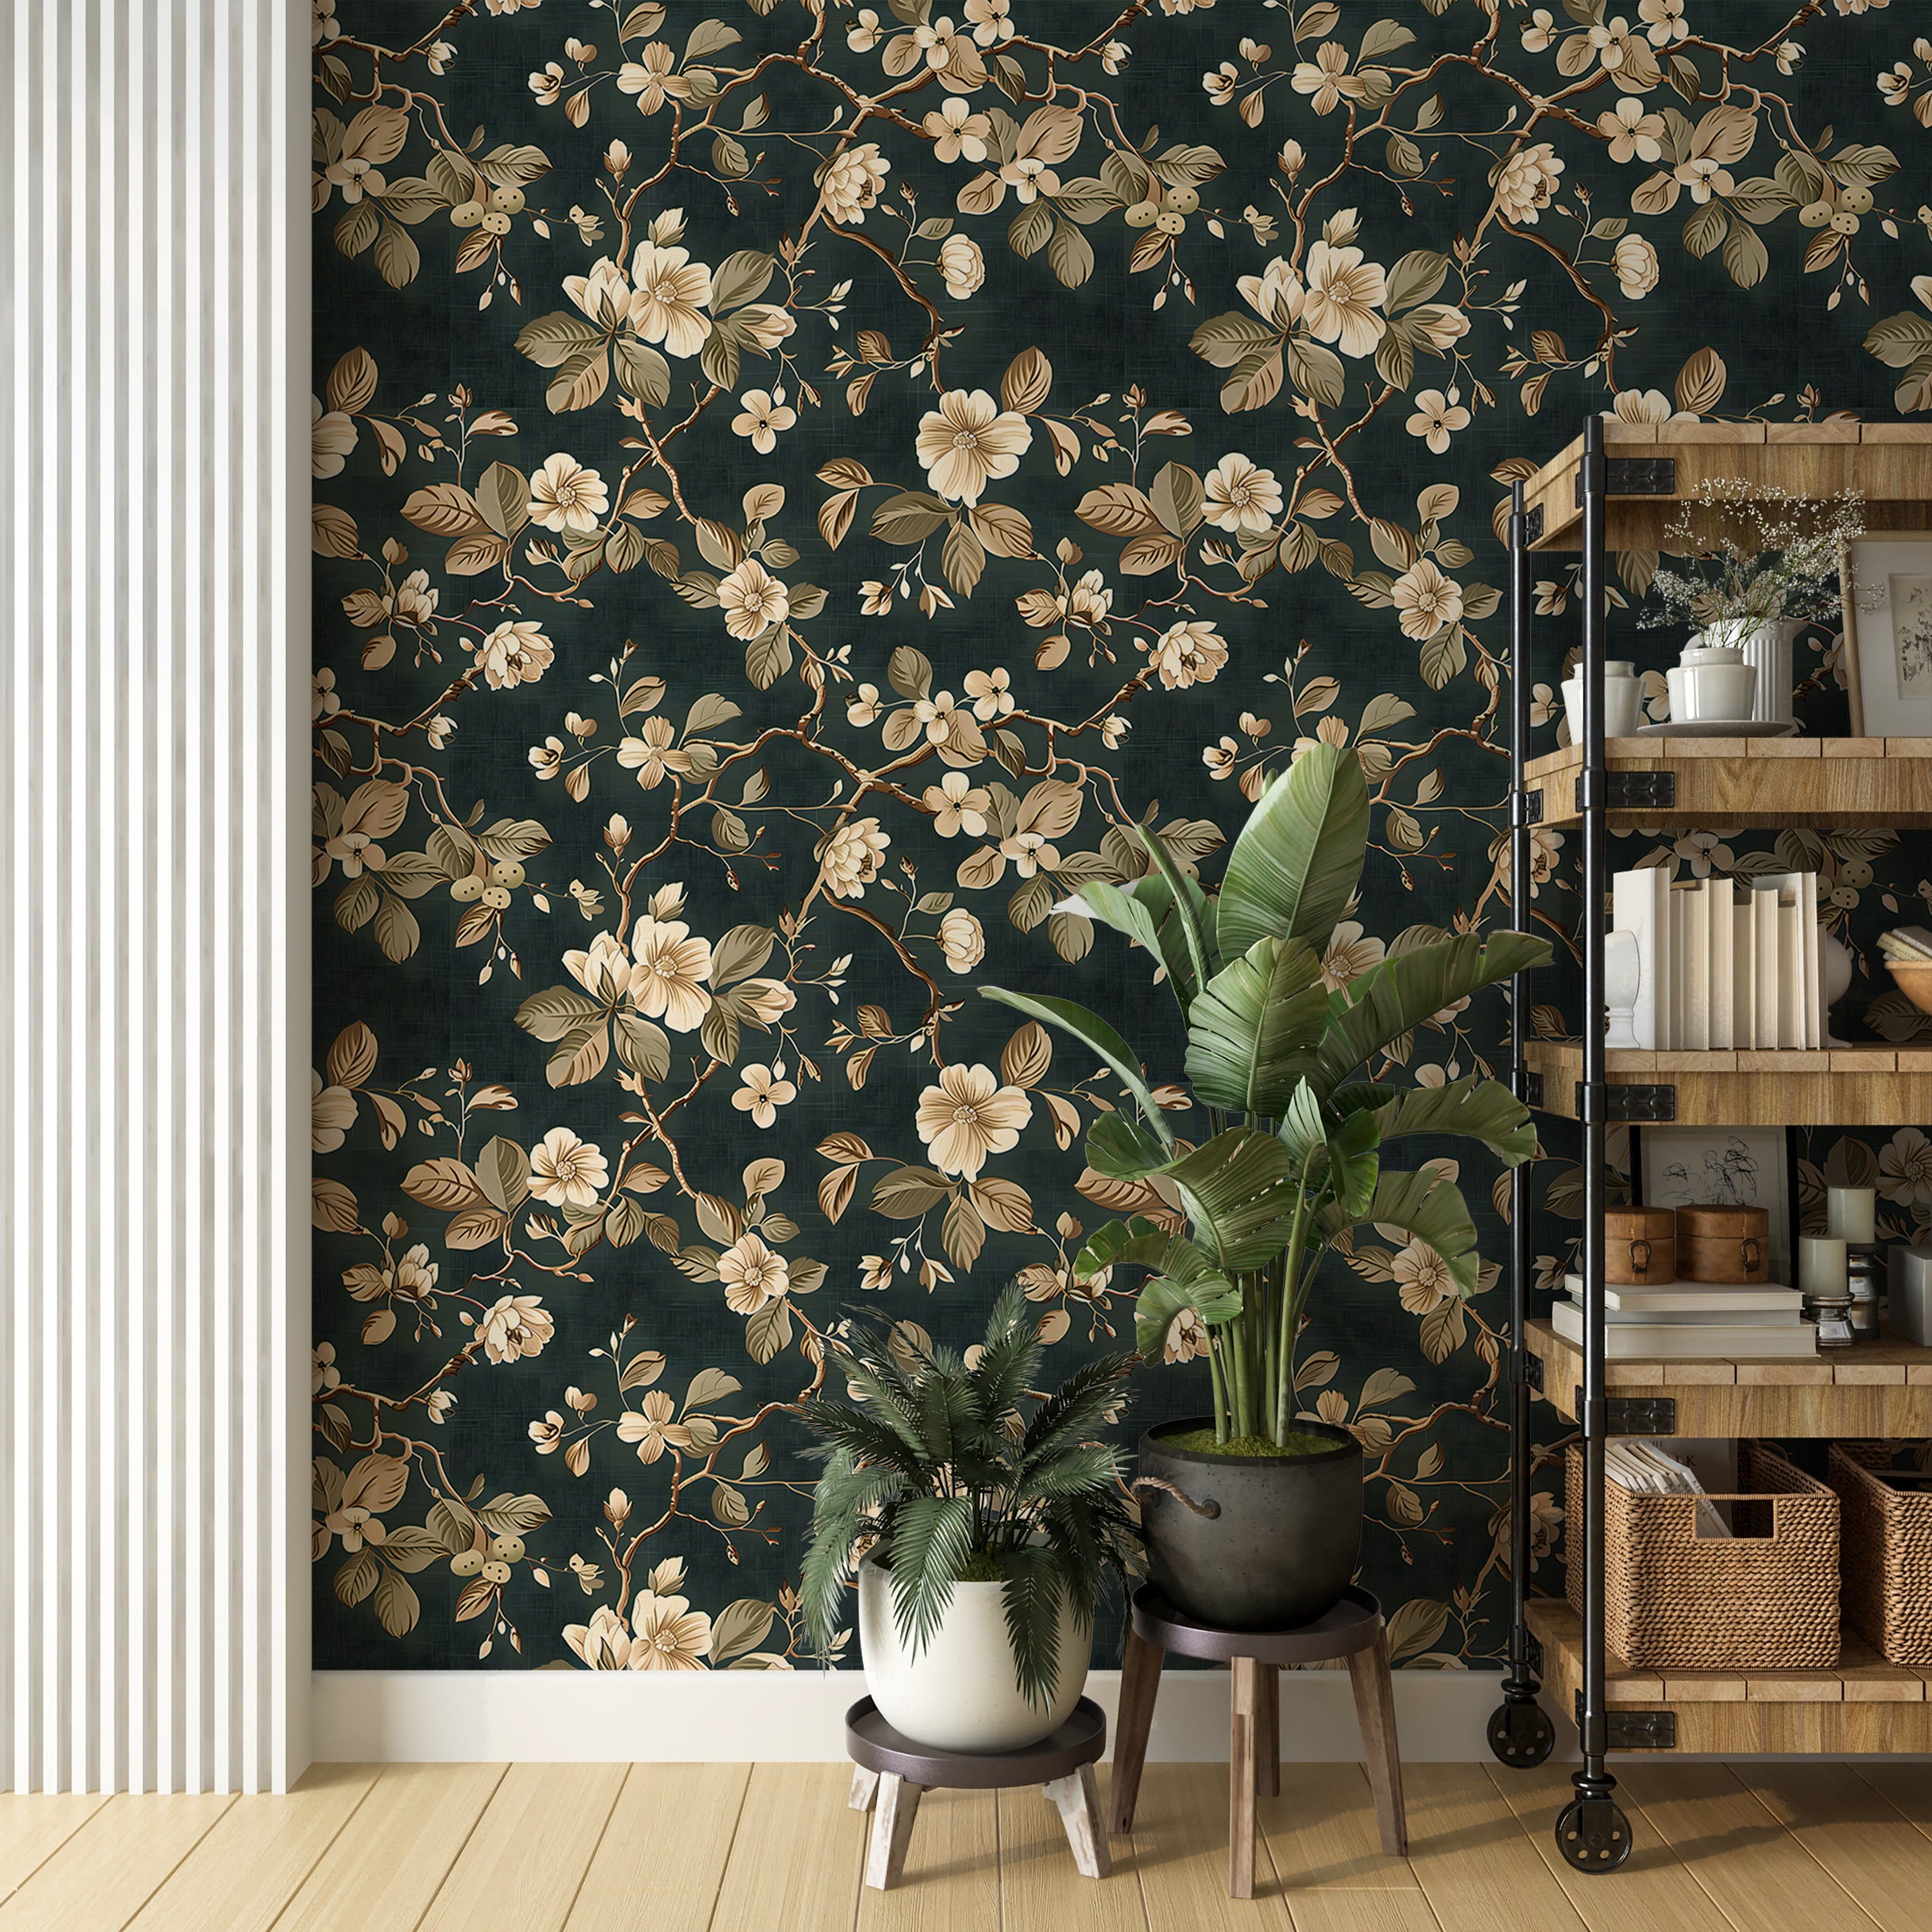 Removable luxury botanical wallpaper